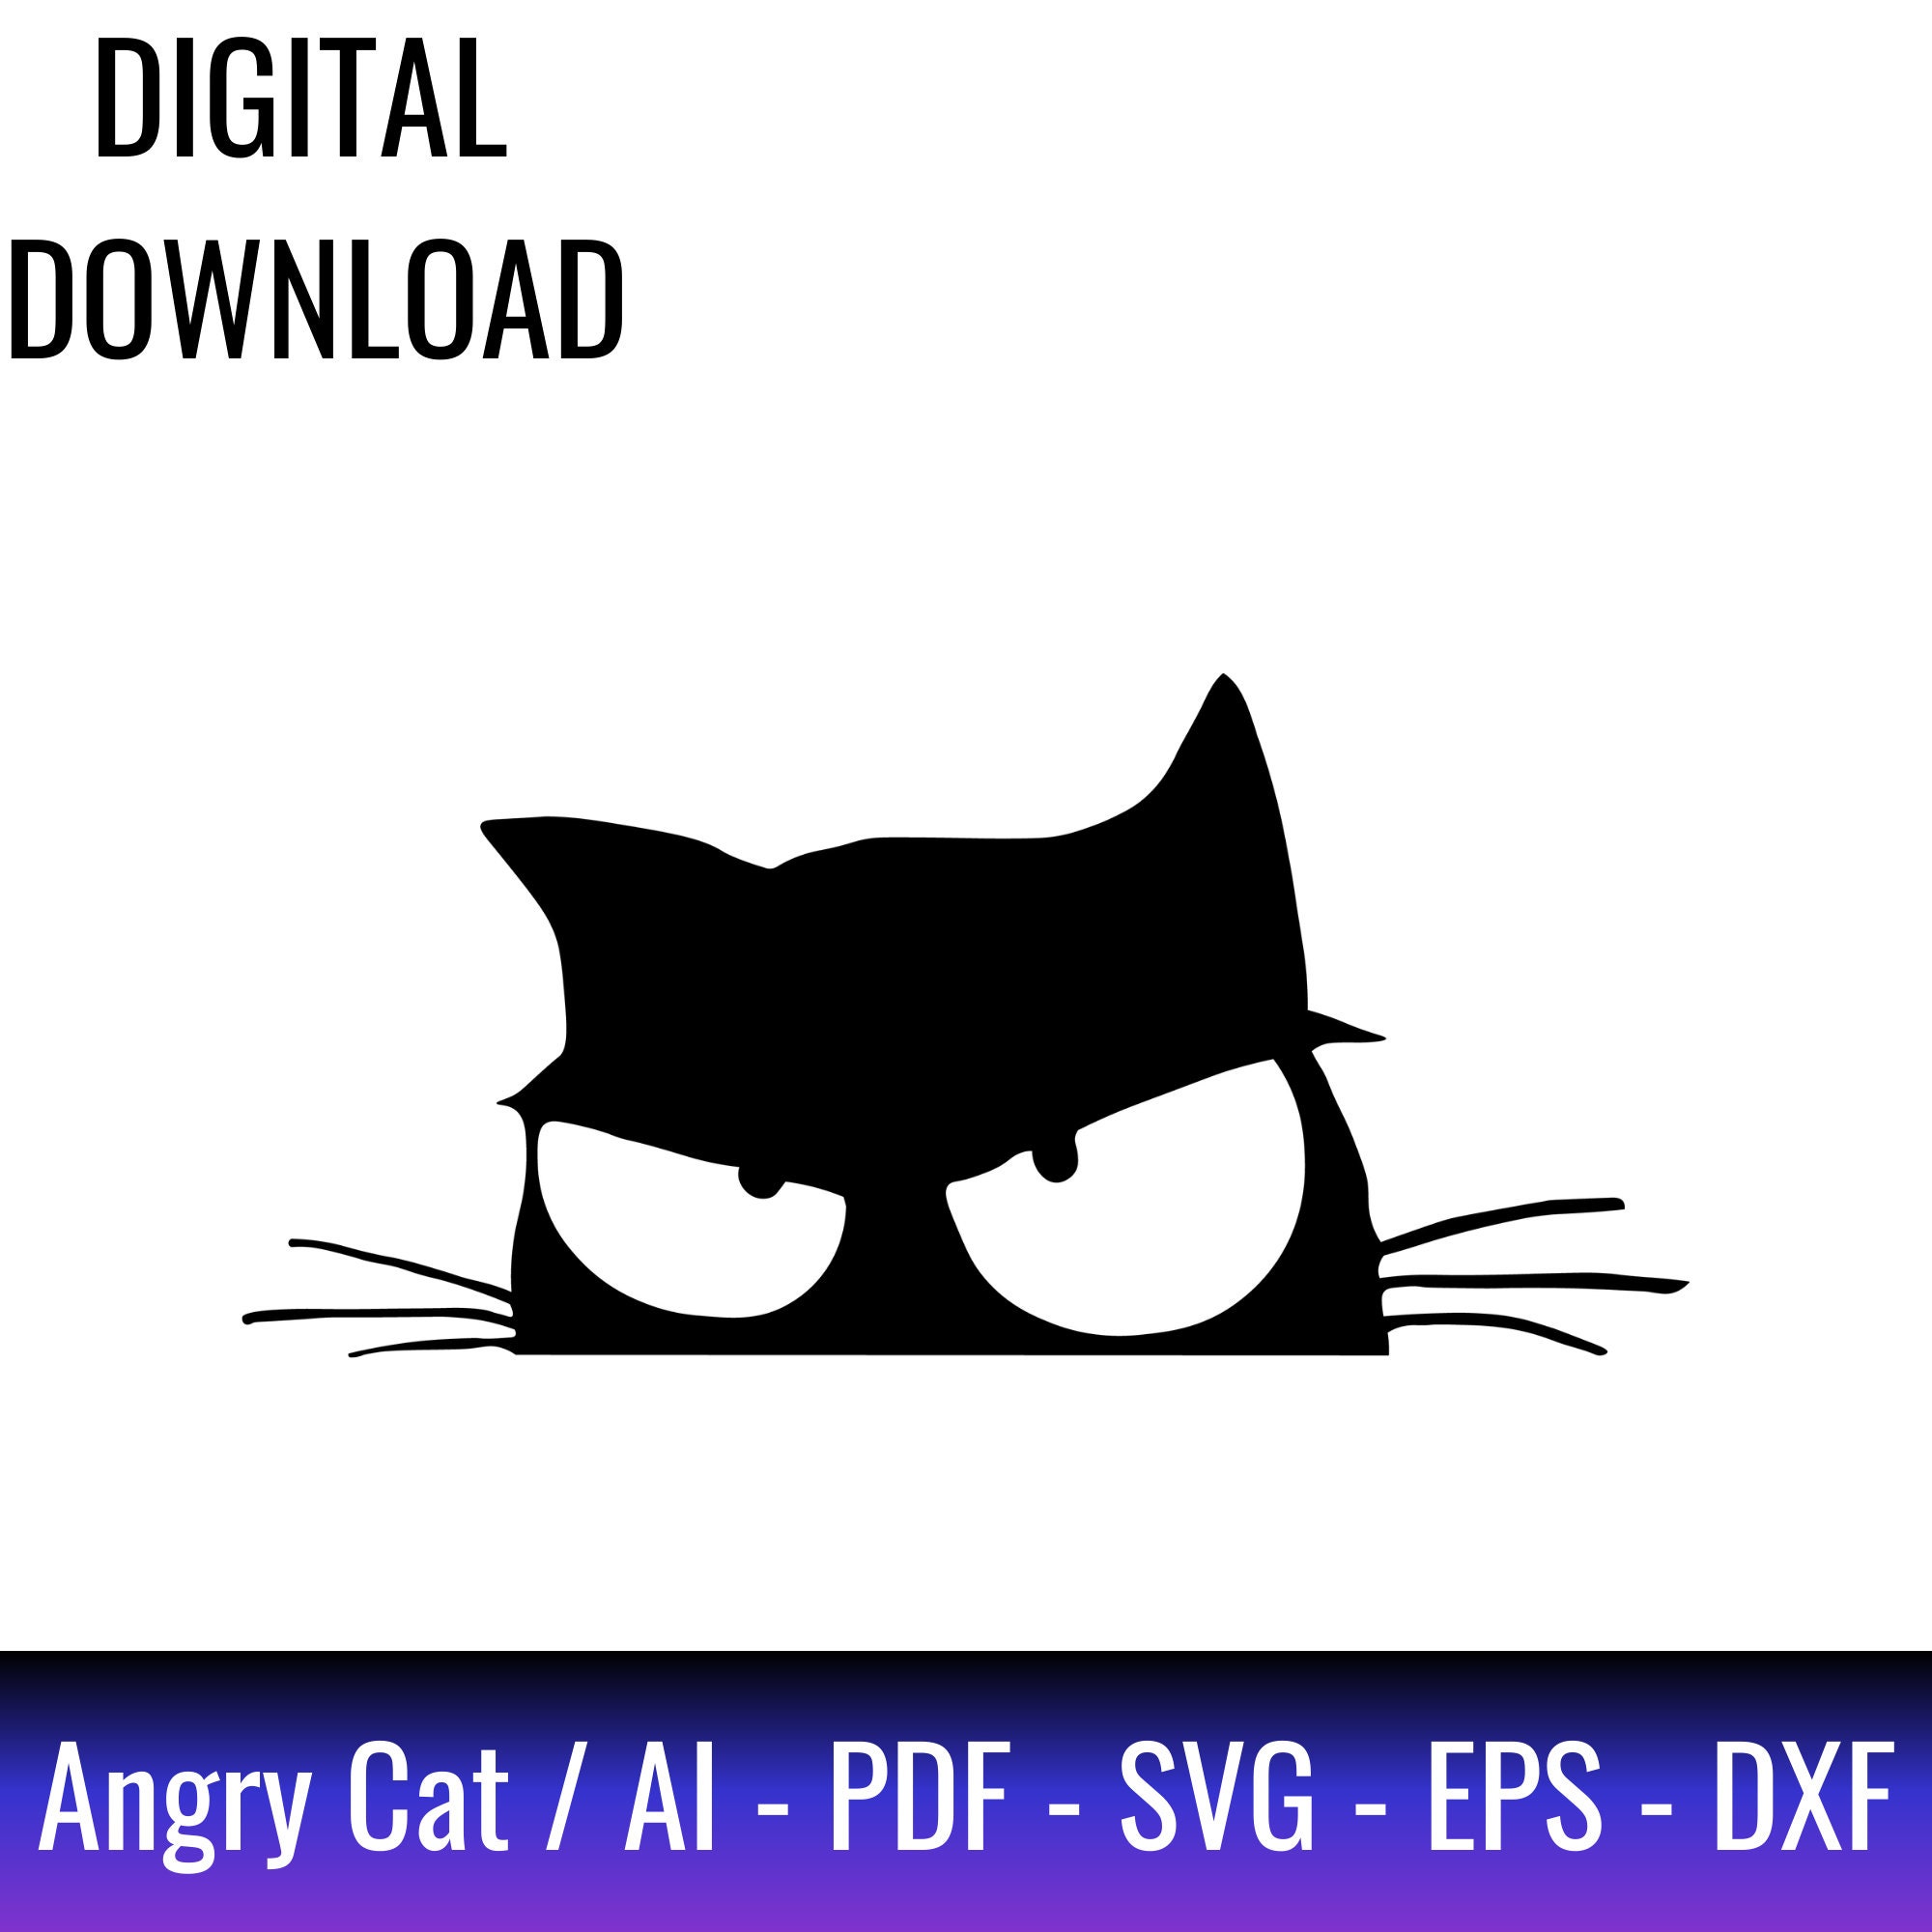 Isolated kitty angry stock vector. Illustration of design - 196460984